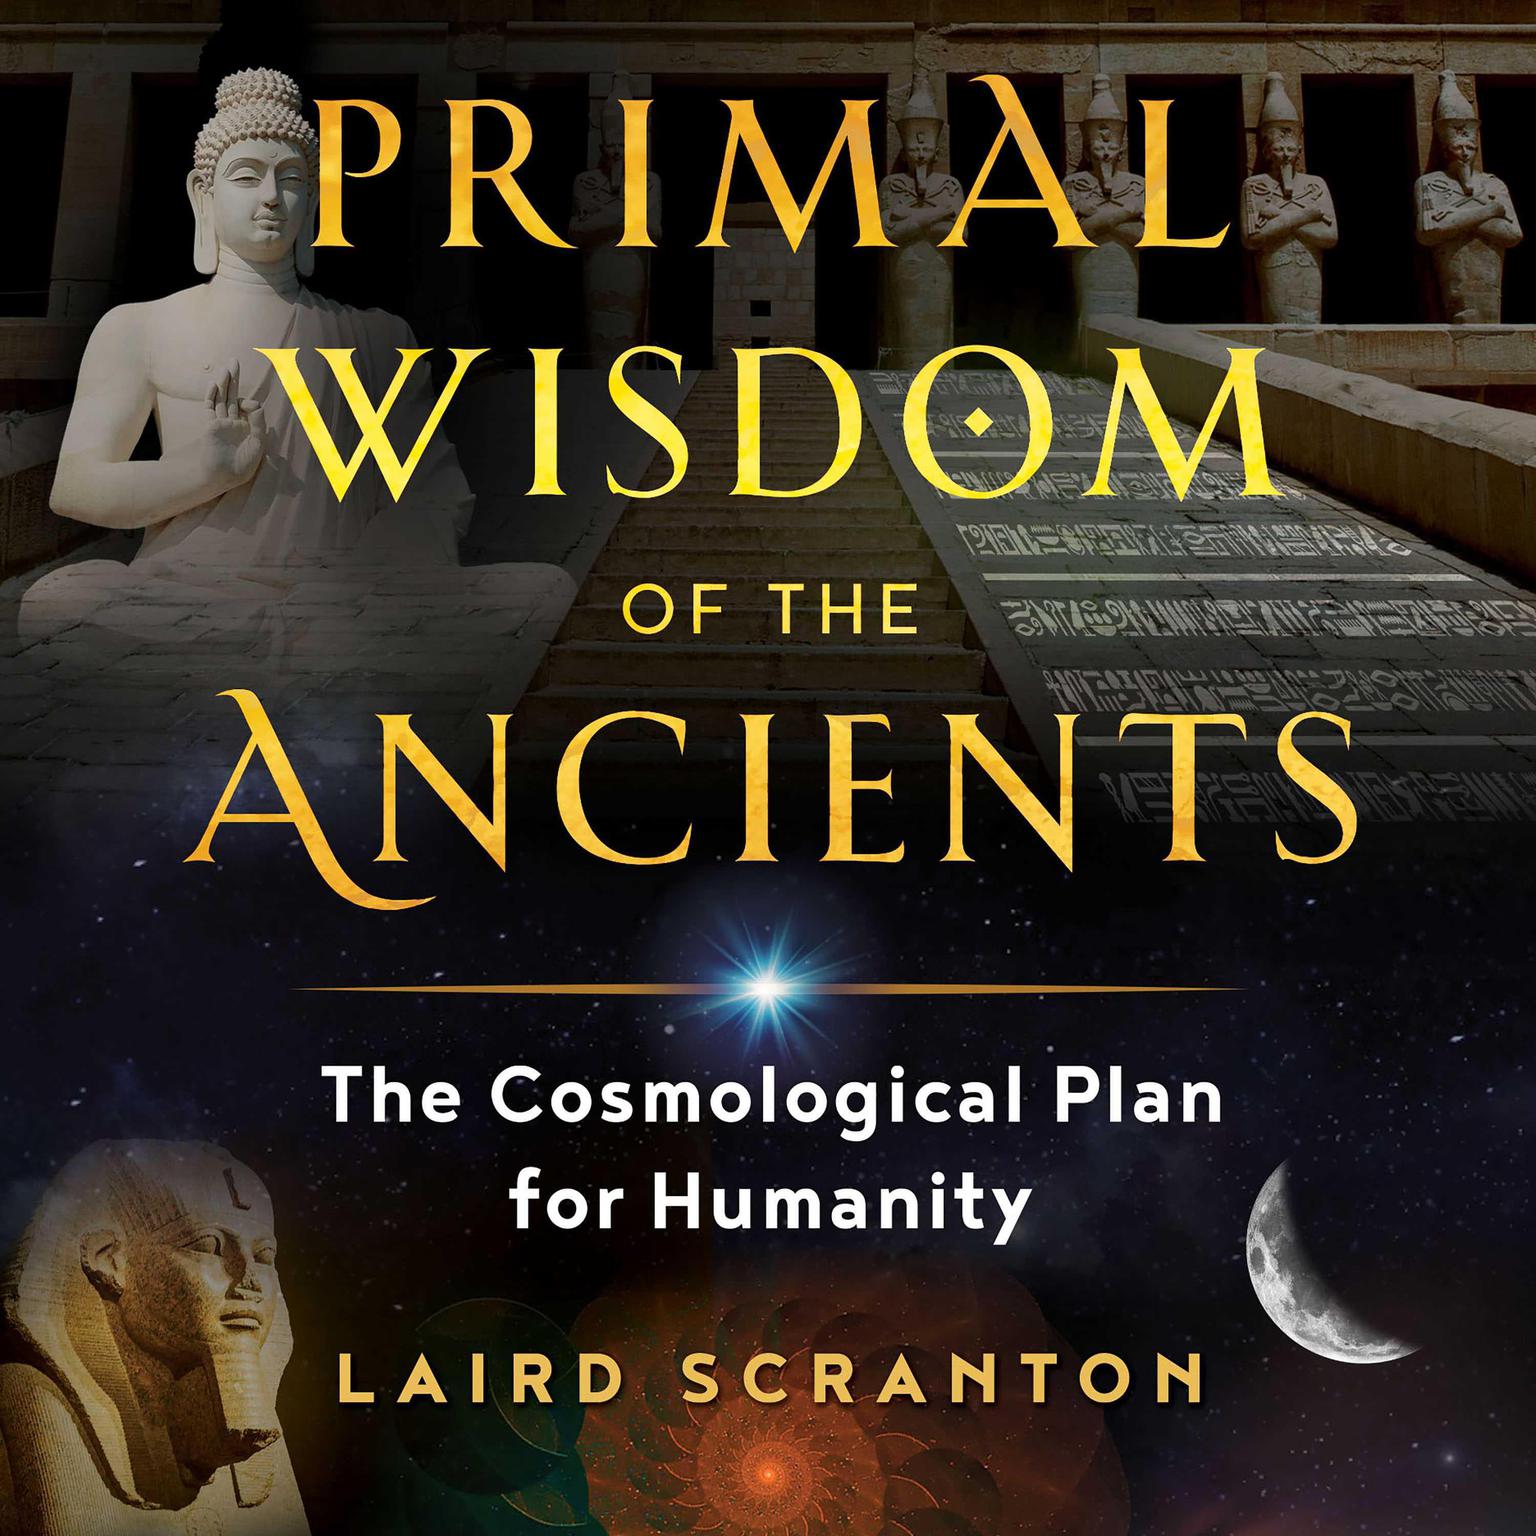 Primal Wisdom of the Ancients: The Cosmological Plan for Humanity Audiobook, by Laird Scranton